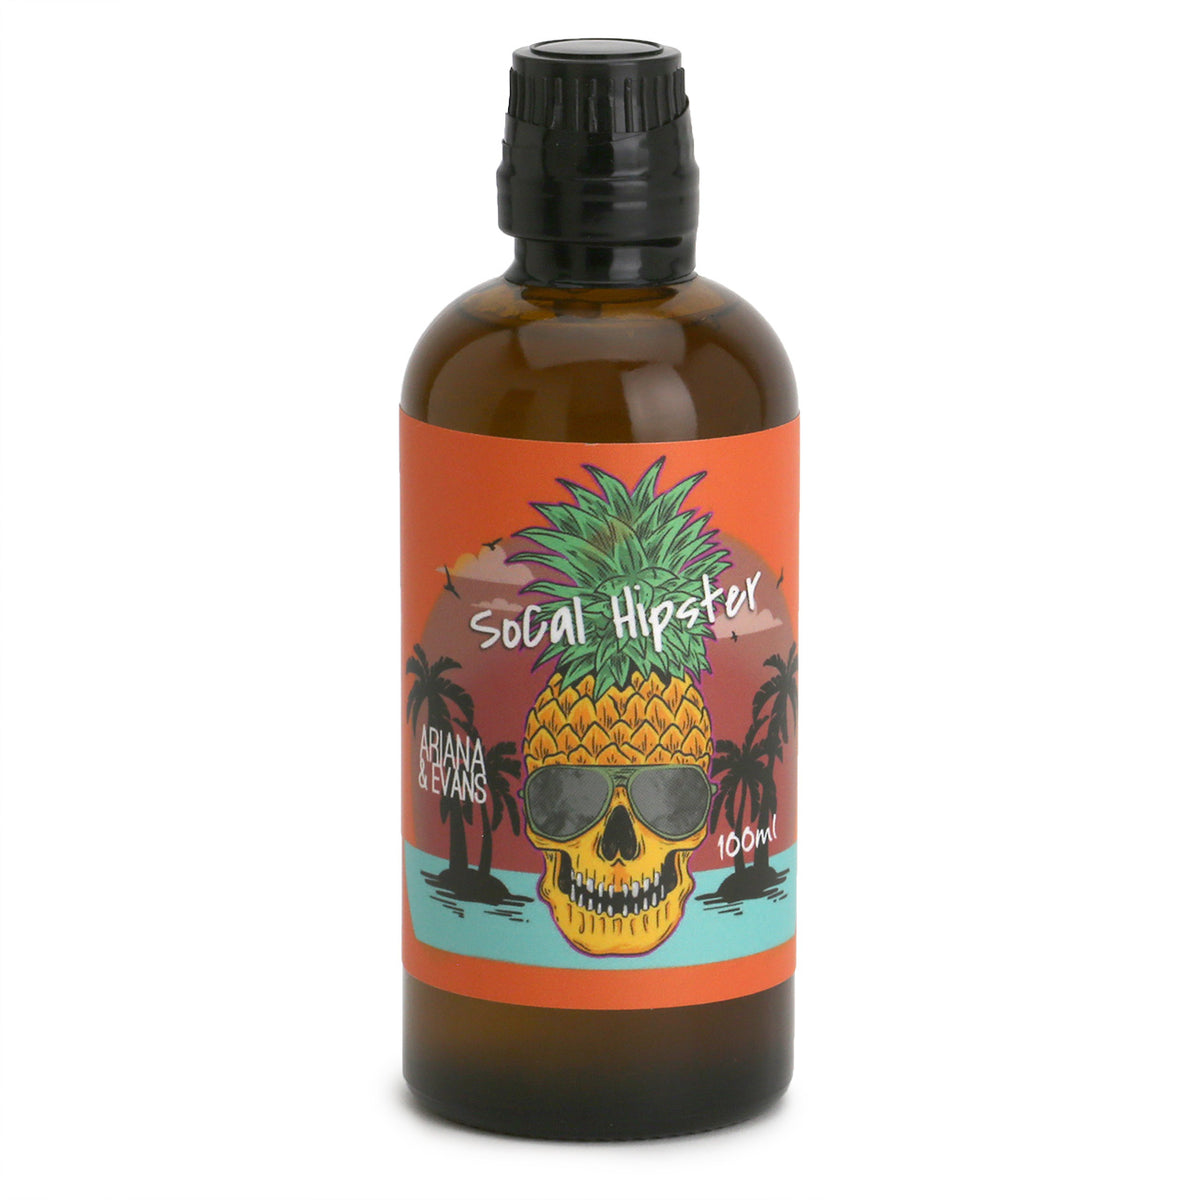 SoCal Hipster After Shave Splash Skin Food from Ariana &amp; Evans is an Amber bottle with an orange label showing a Pineapple head wearing sunglasses